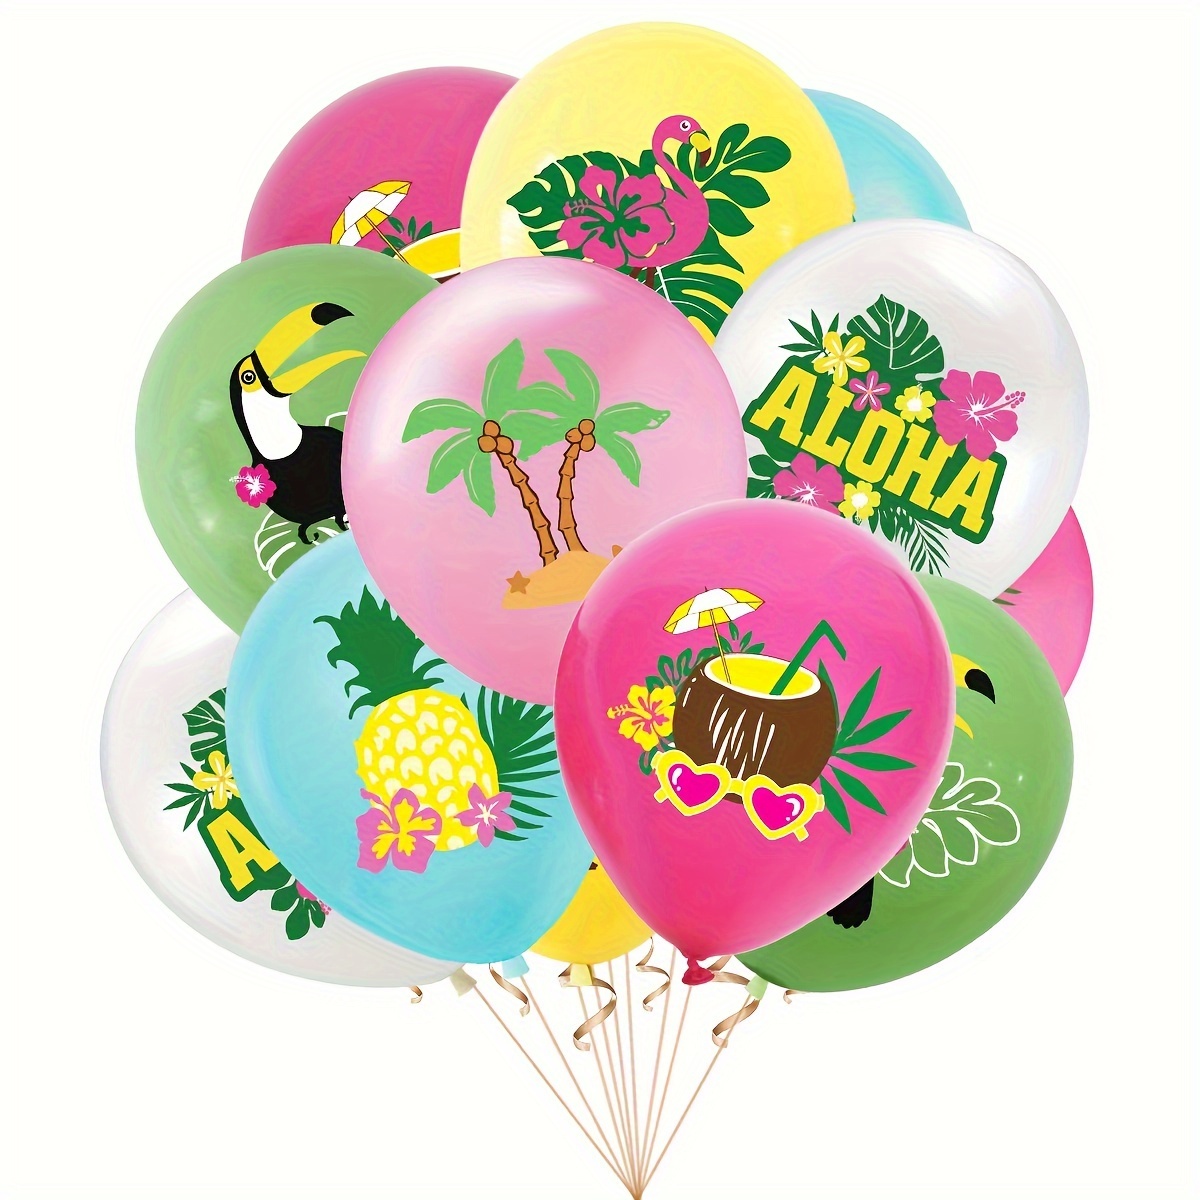 

Hawaiian Tropical Plant & Fruit Themed Balloon Set - Perfect For Summer Beach Parties, Birthdays & More - Latex, Multi-pack